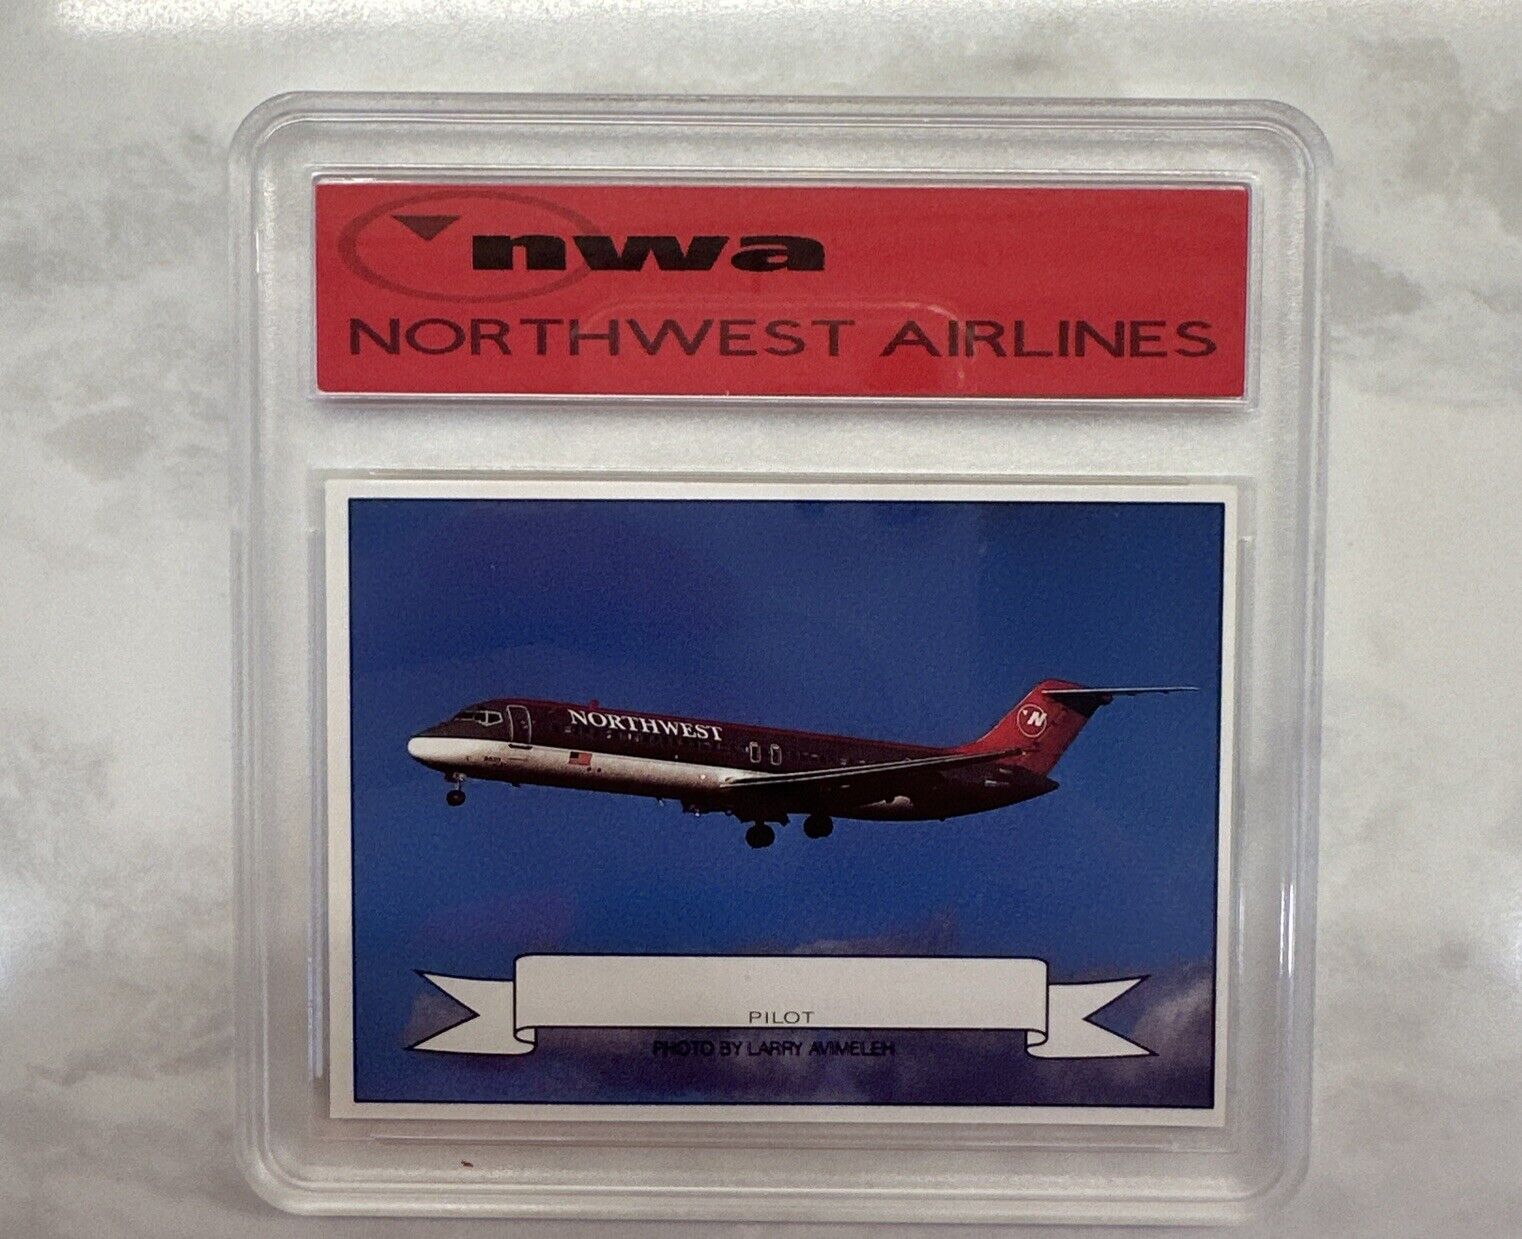 NORTHWEST AIRLINES PILOT TRADING CARD RARE BOEING DC-9  HARD CASE MINT HTF 1990s